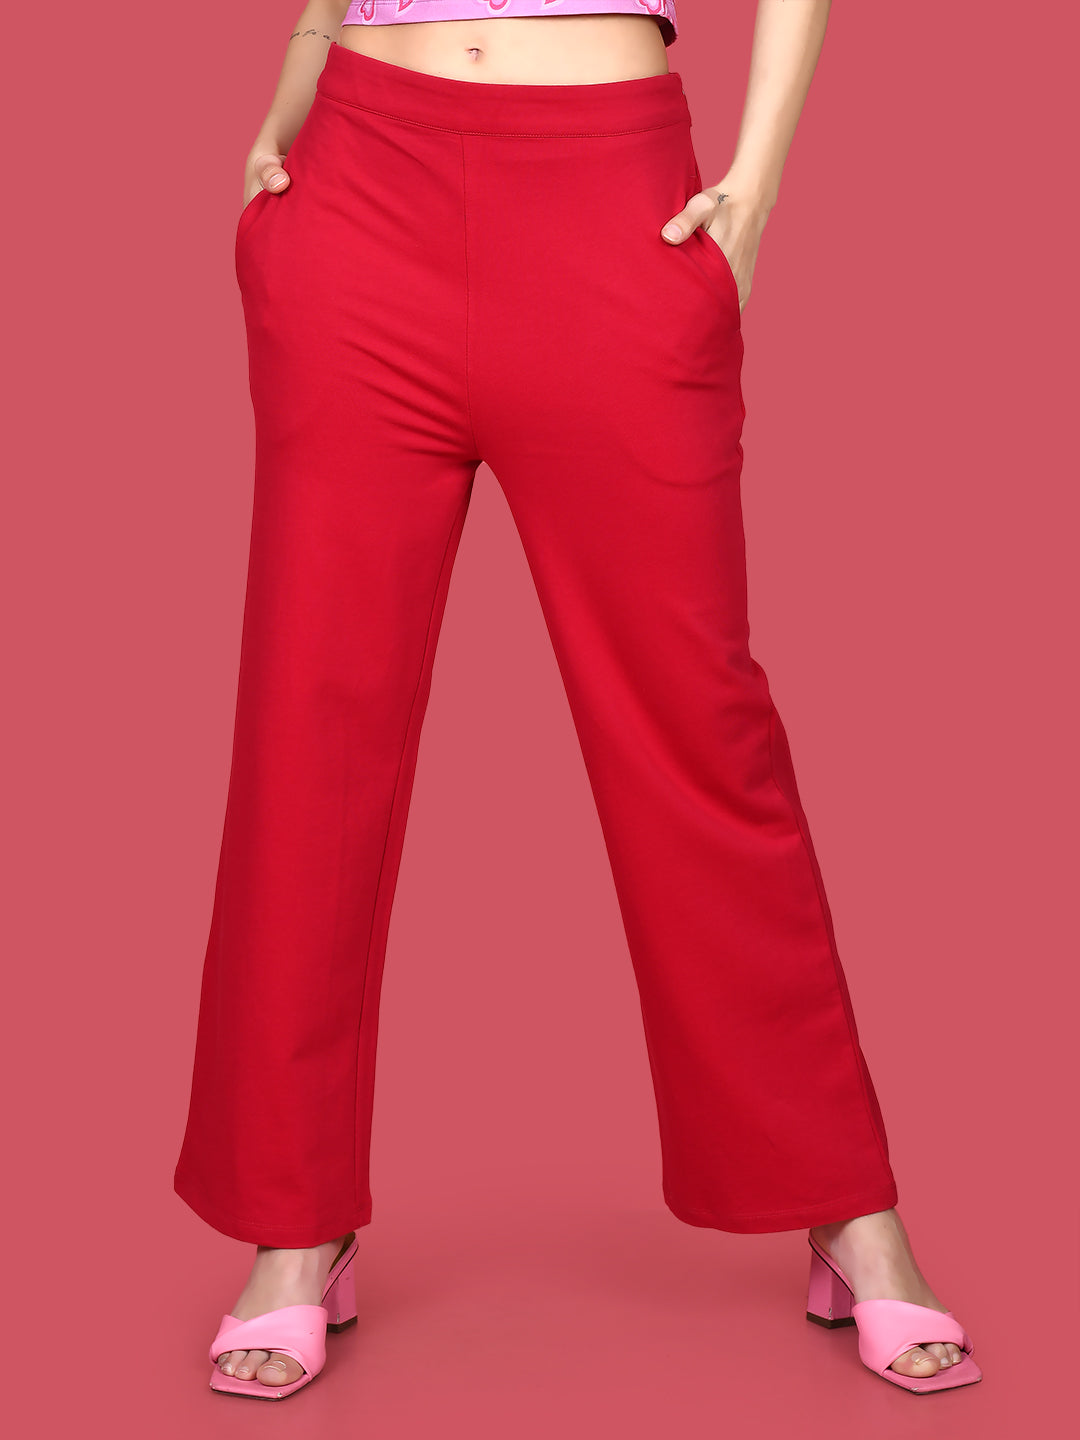 Buy Red W Coral Ridge Pant for Women Online at Columbia Sportswear | 500790